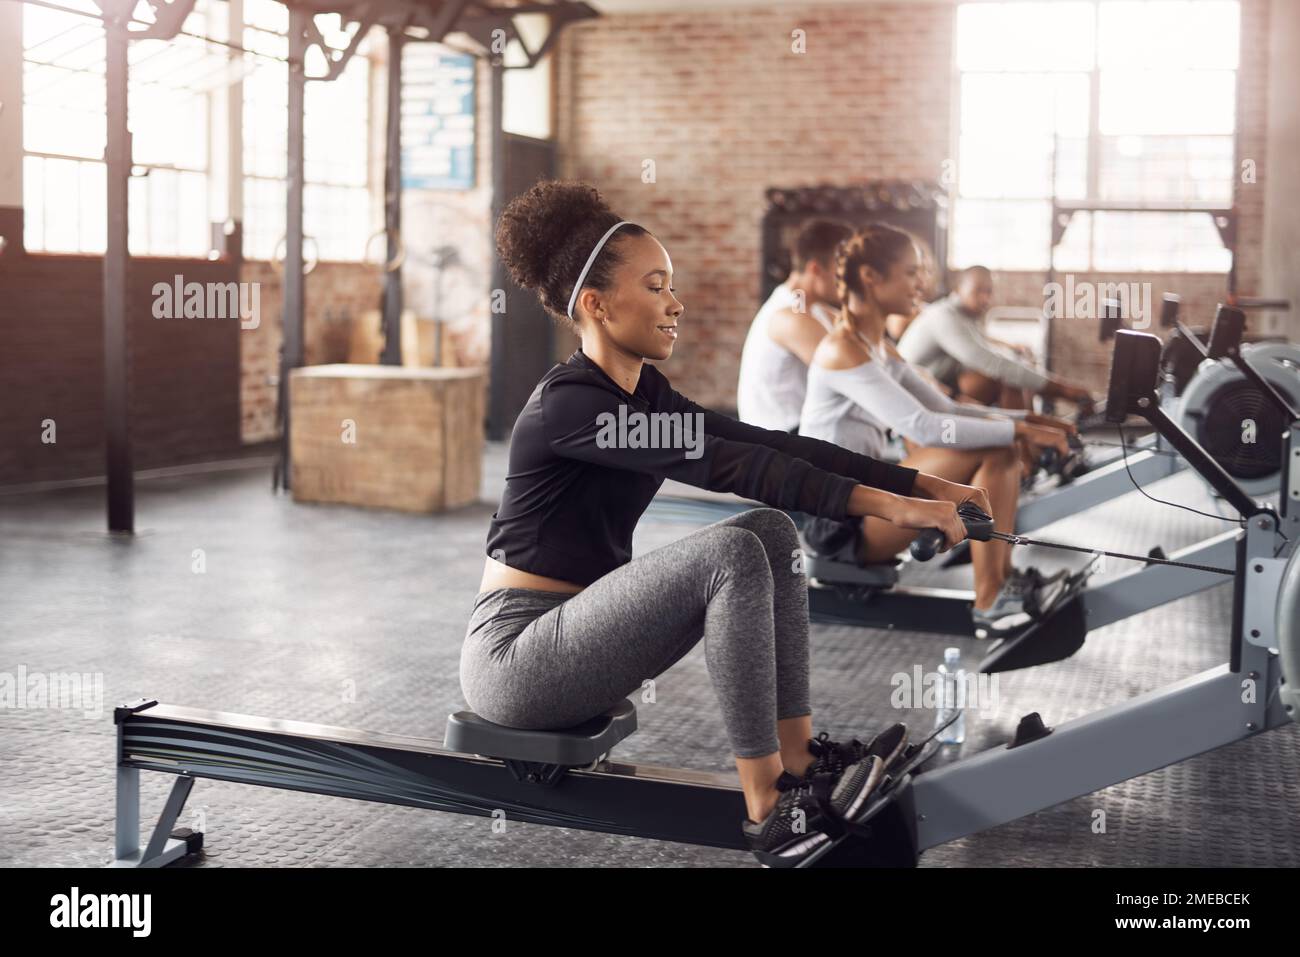 The best way to target every muscle group. a young woman working out with a rowing machine in the gym. Stock Photo